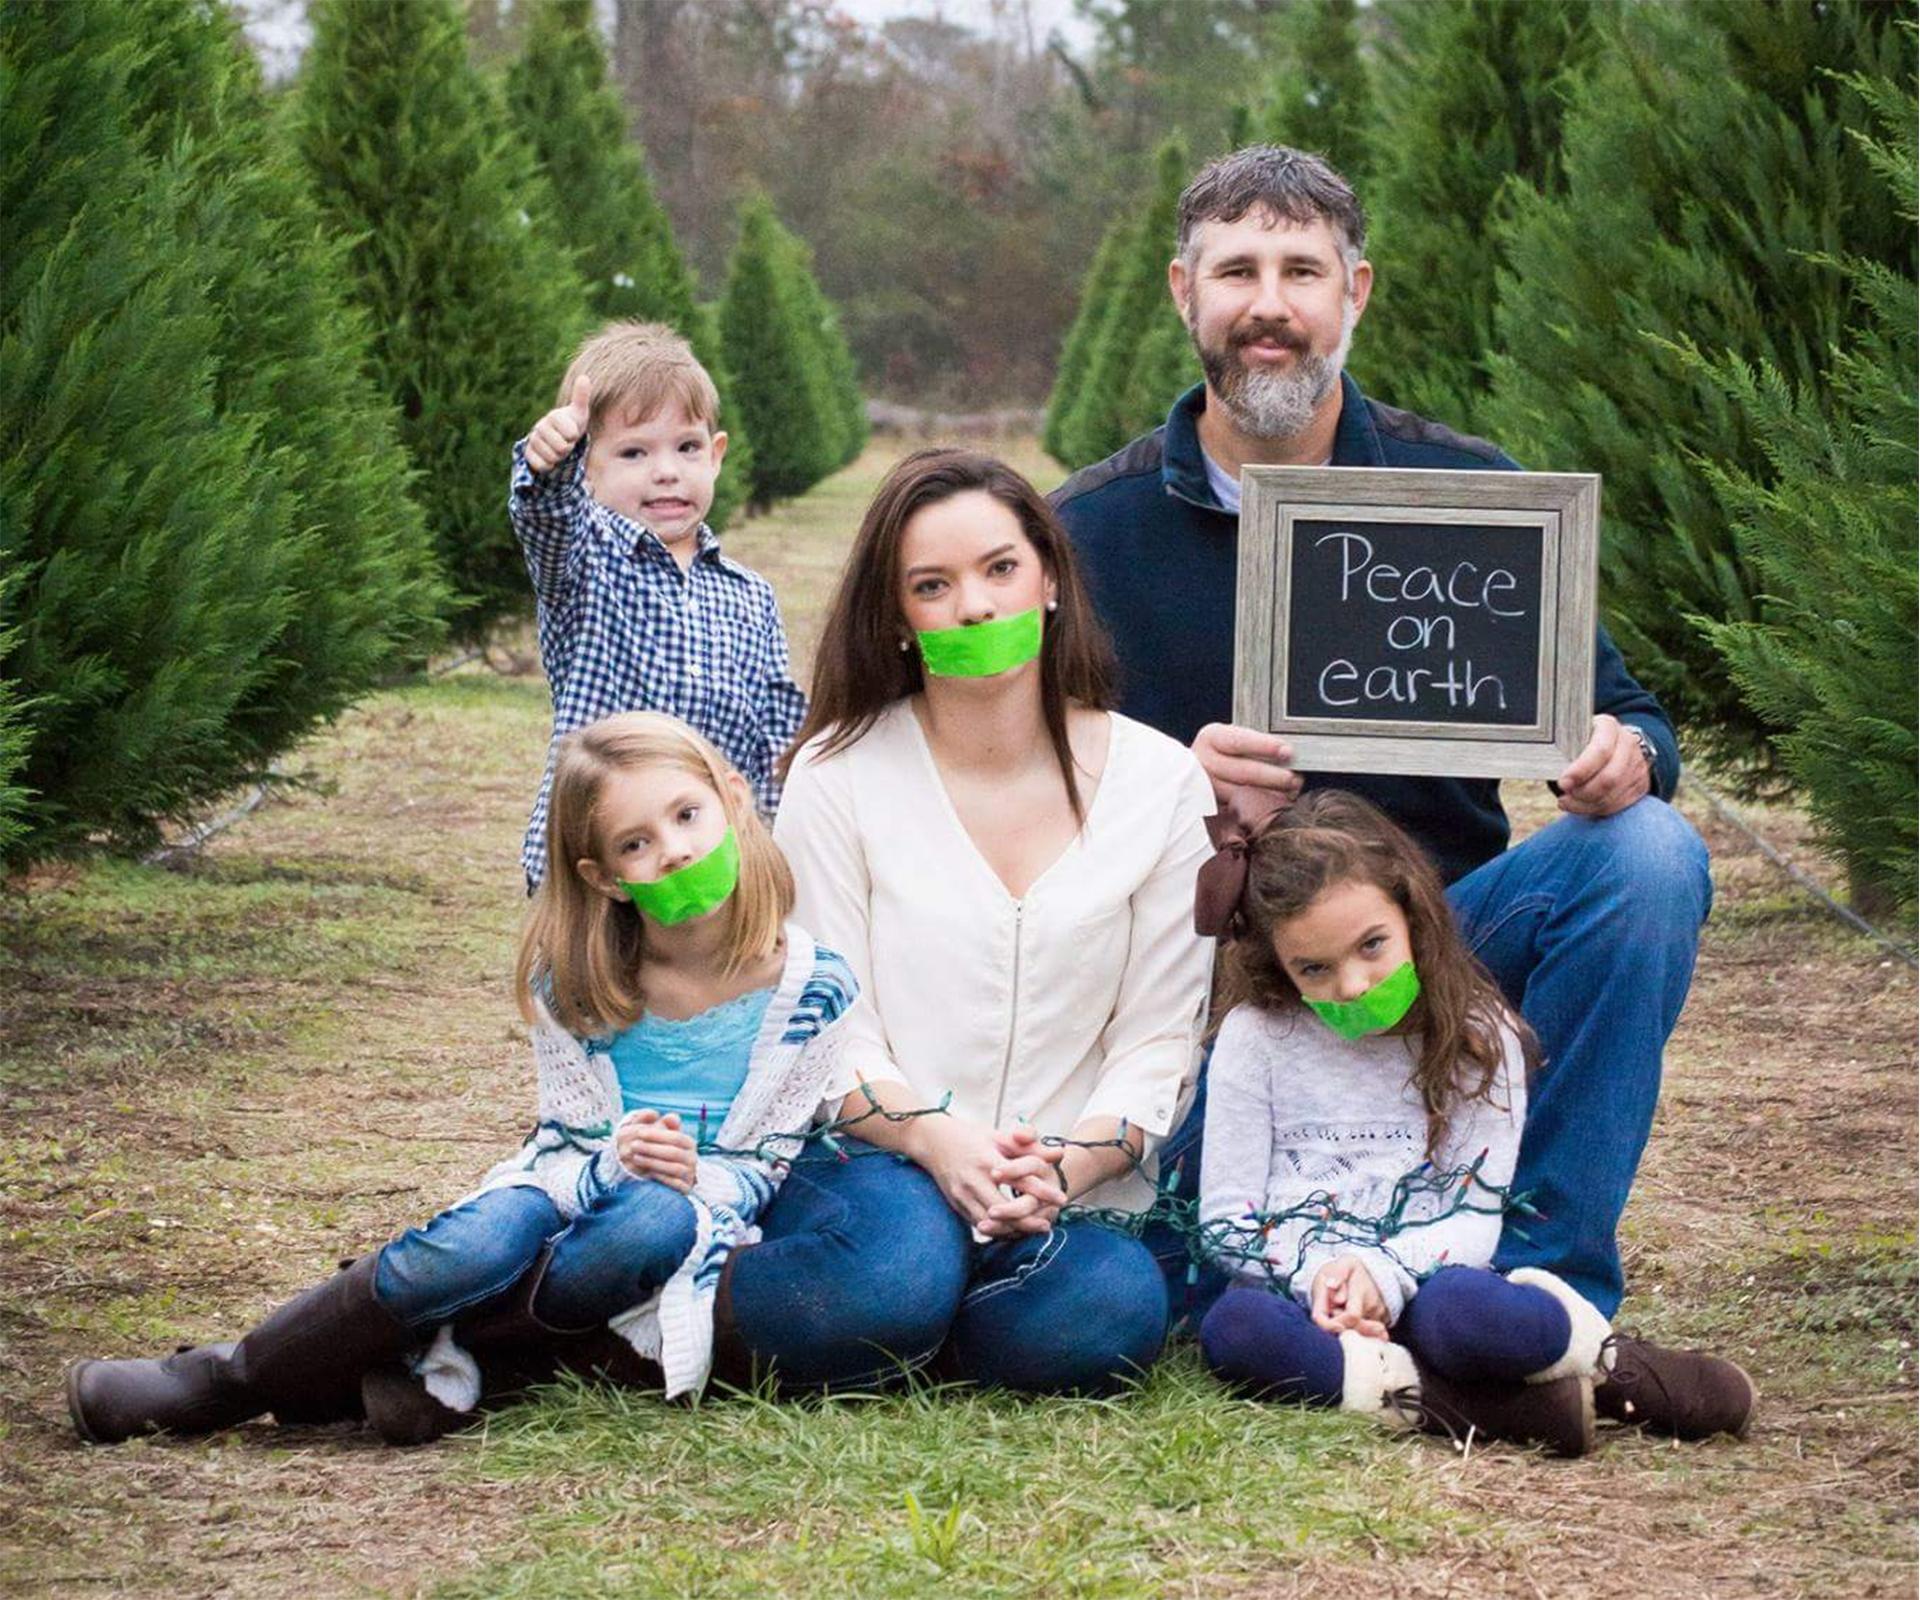 Photographer under fire for ‘horrifyingly sexist’ family photo